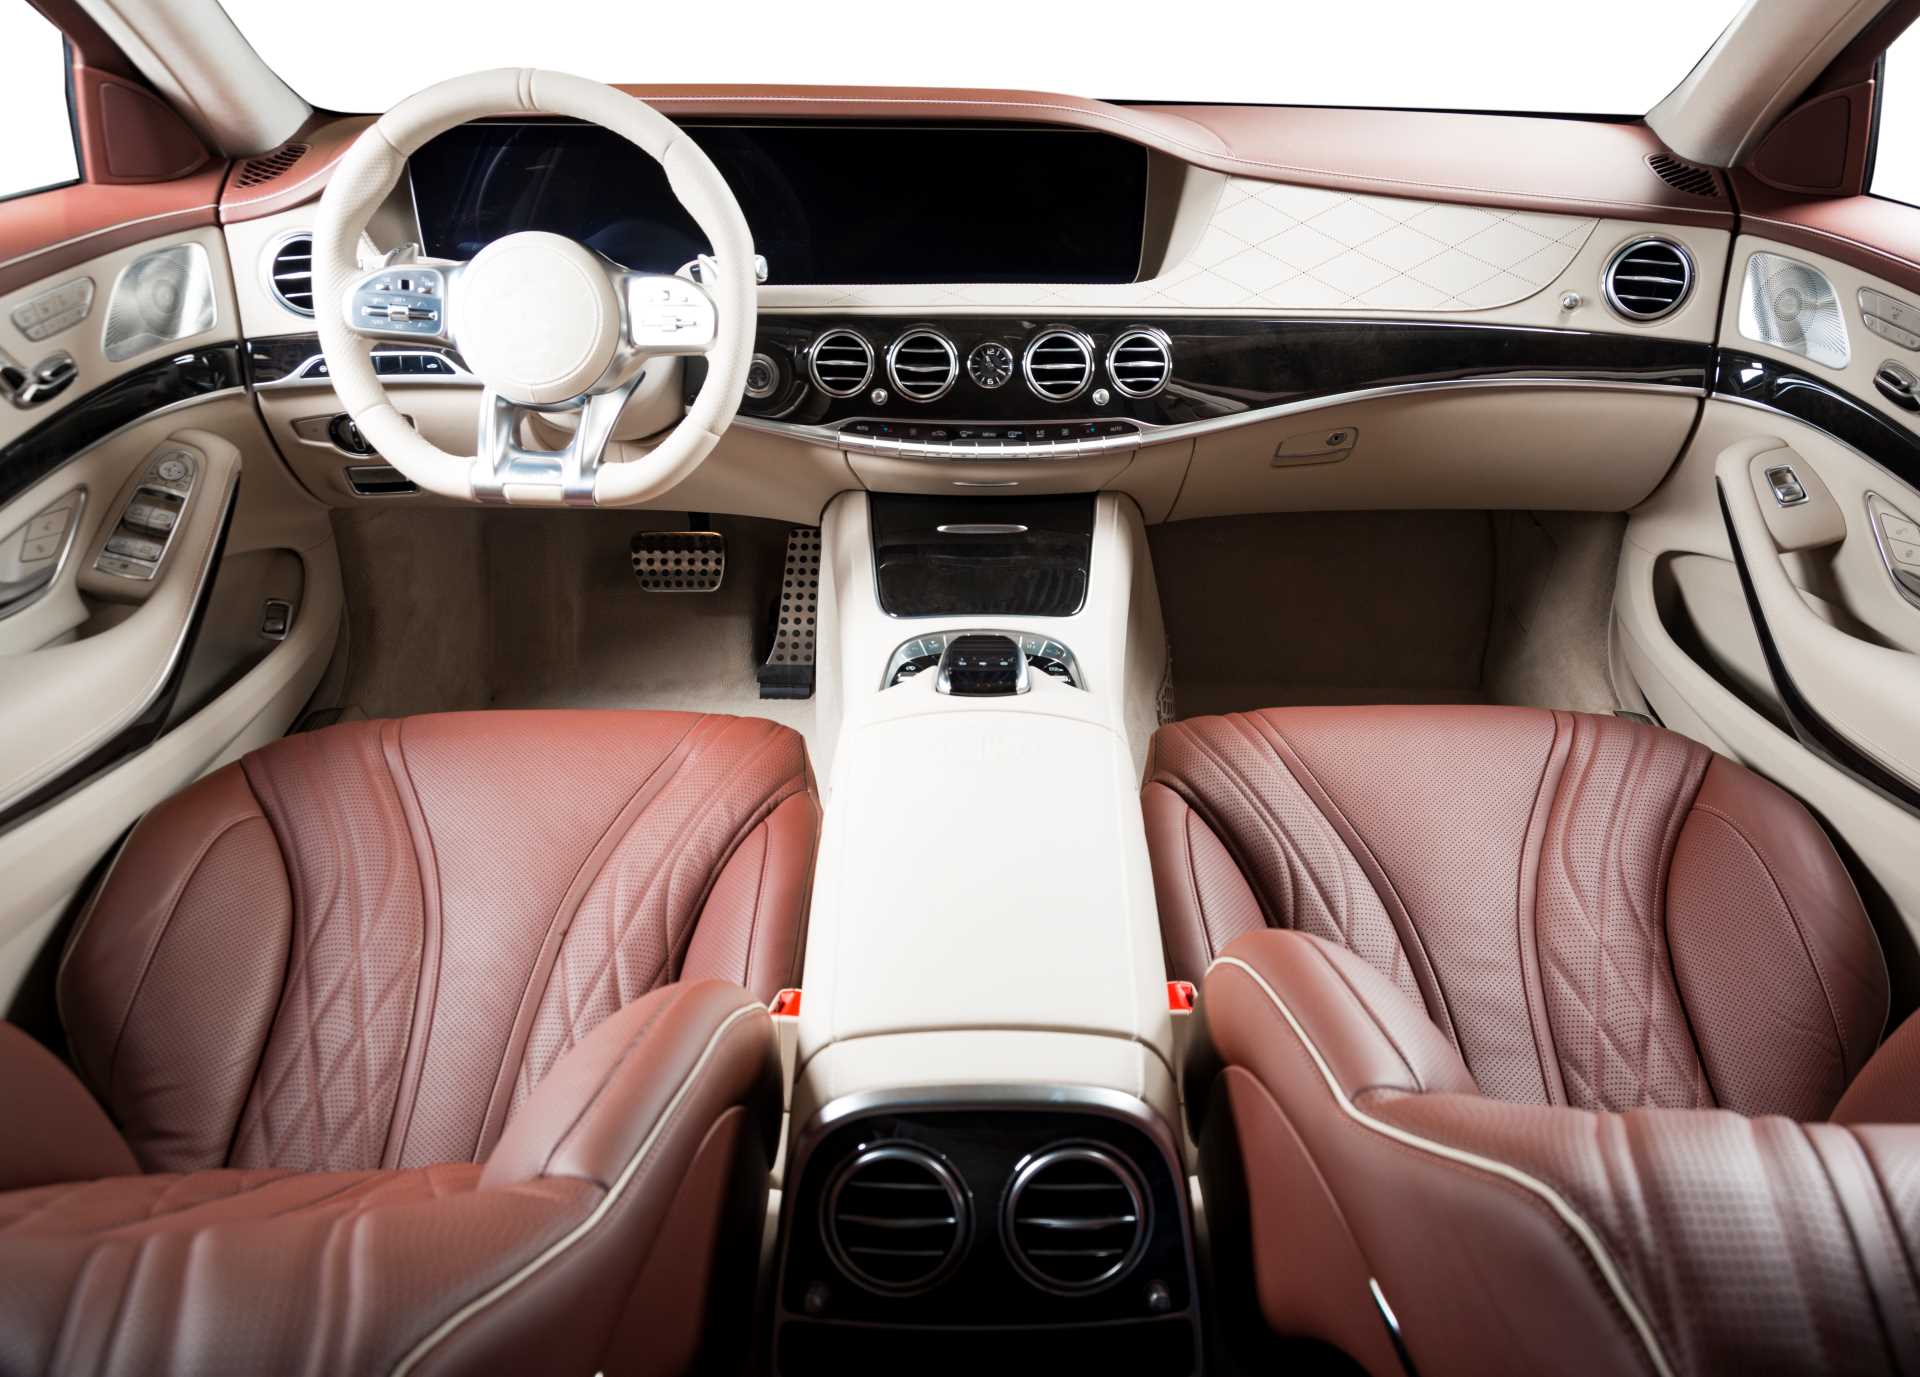 Interior of a modern luxury car | Featured image for the Luxury Car Tax Explained blog from Fido Finance.